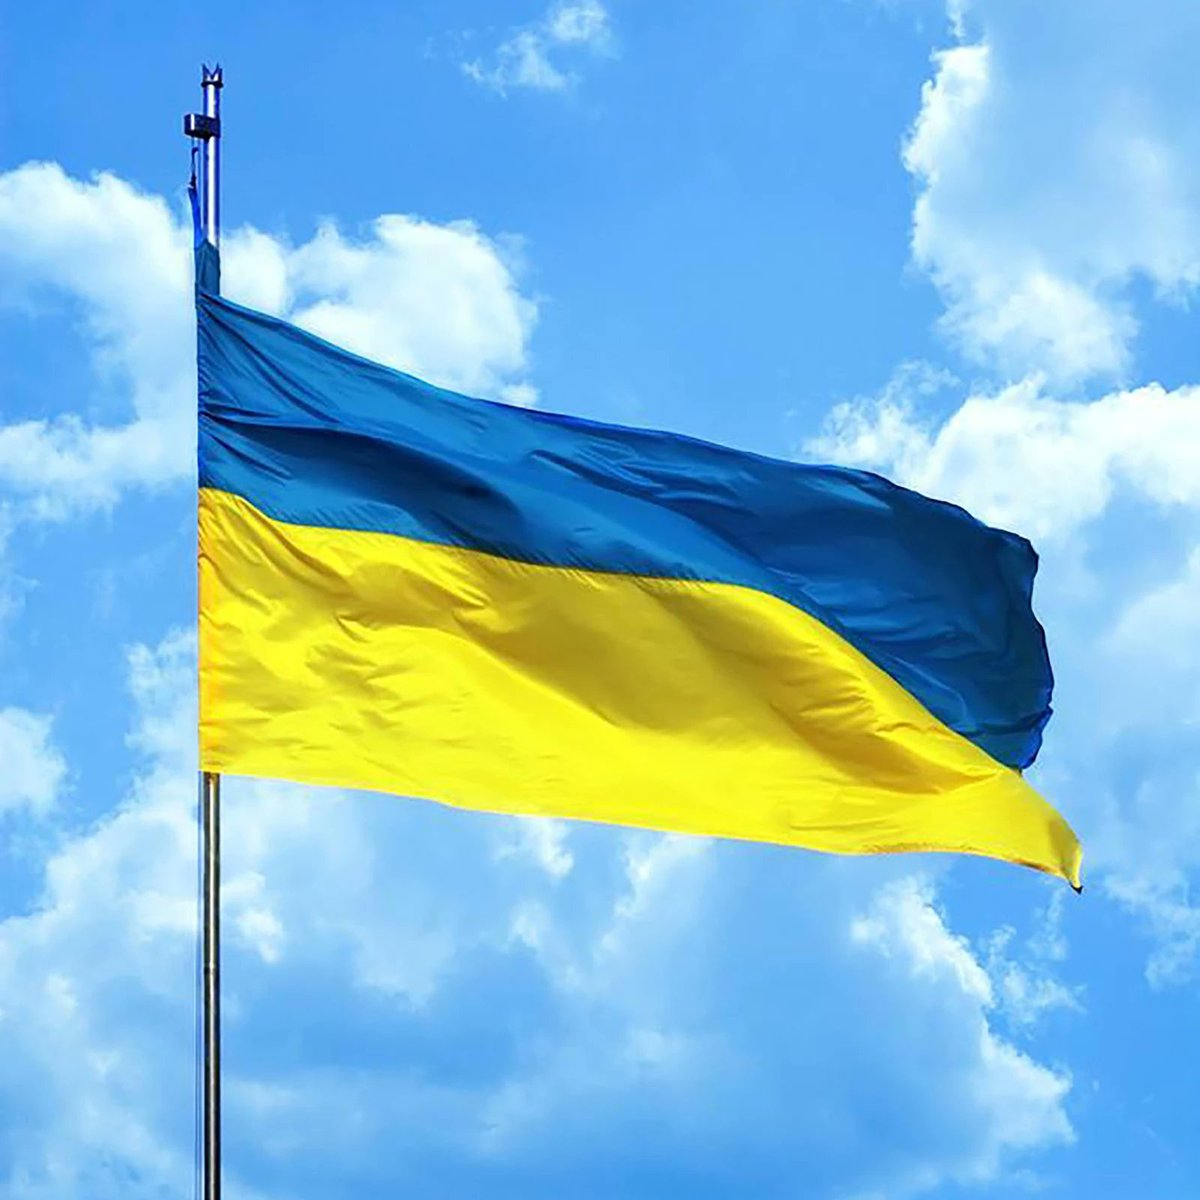 Love and solidarity to Ukraine today! It is just horrific and heartbreaking what's happening! 🙏🇺🇦😢 But also let's remember that this is Putin's fault and not the Russian people who never asked for this, and are now being dragged into this war!